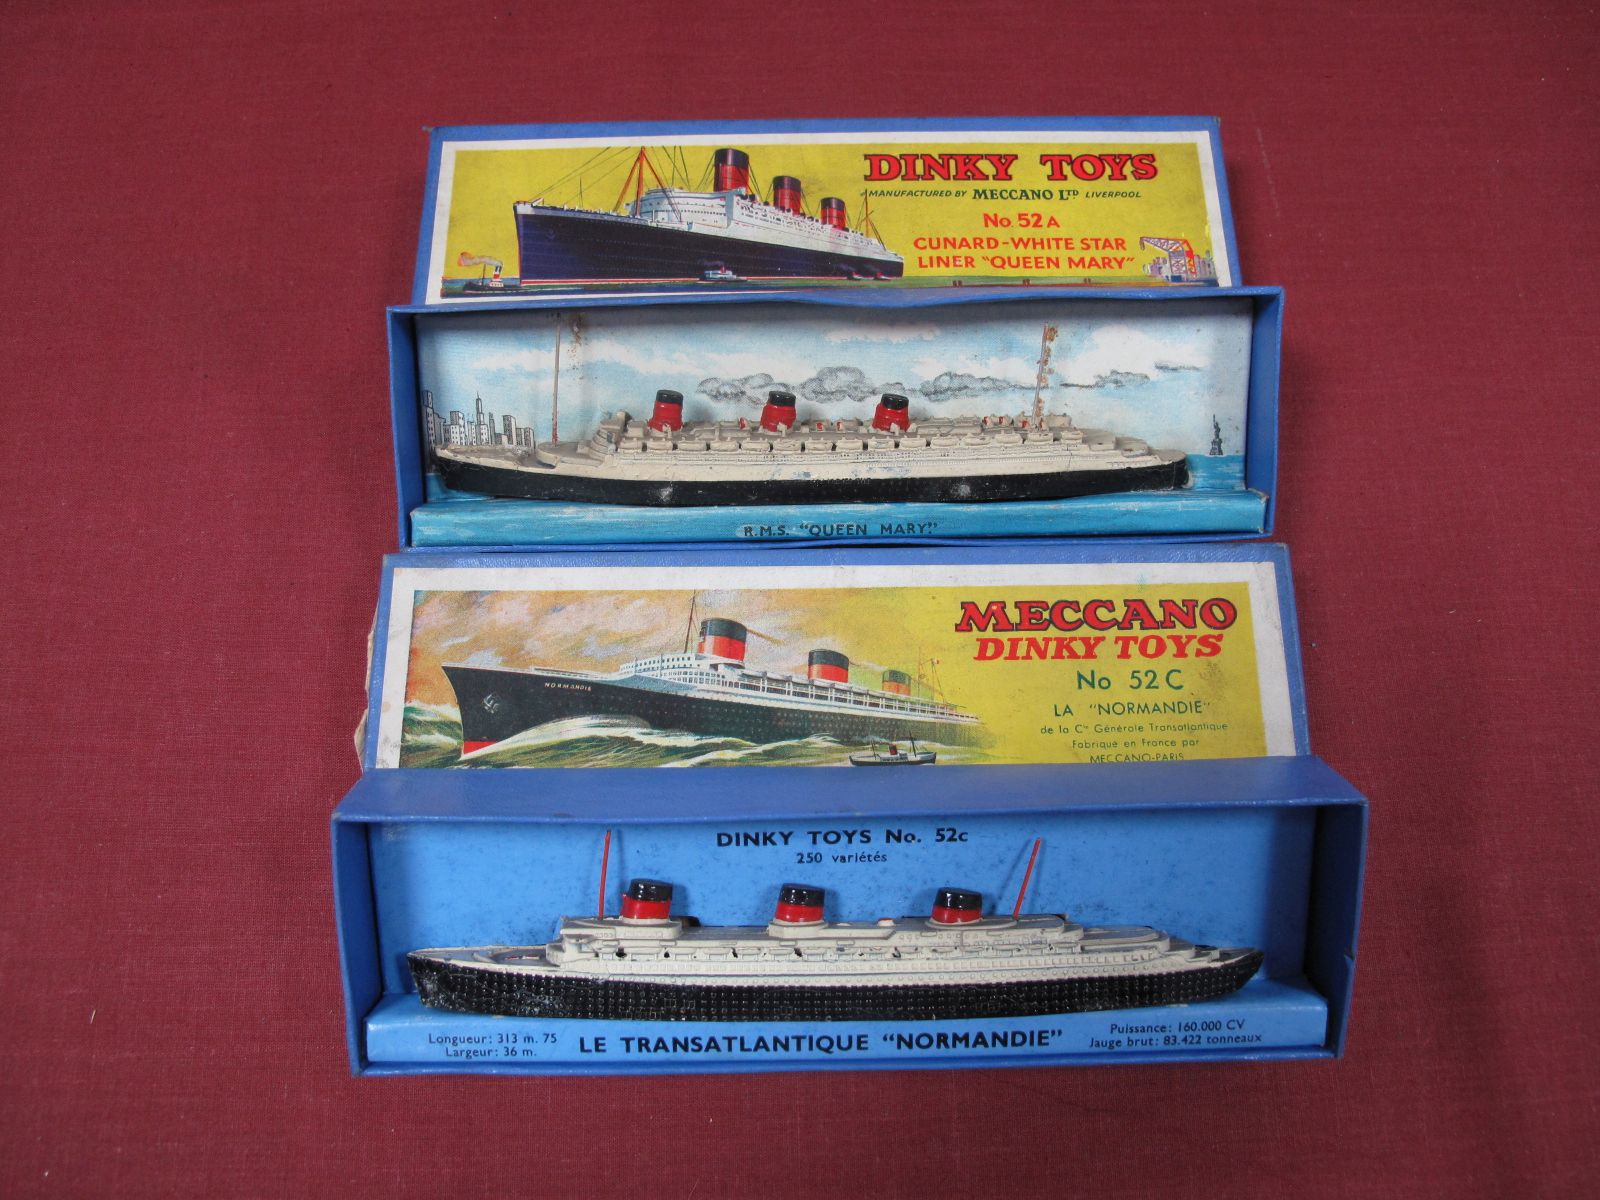 Two Pre-War Dinky Ships, No. 52A Cunard White Star- 'Queen Mary' and 52C 'La Normandie', both